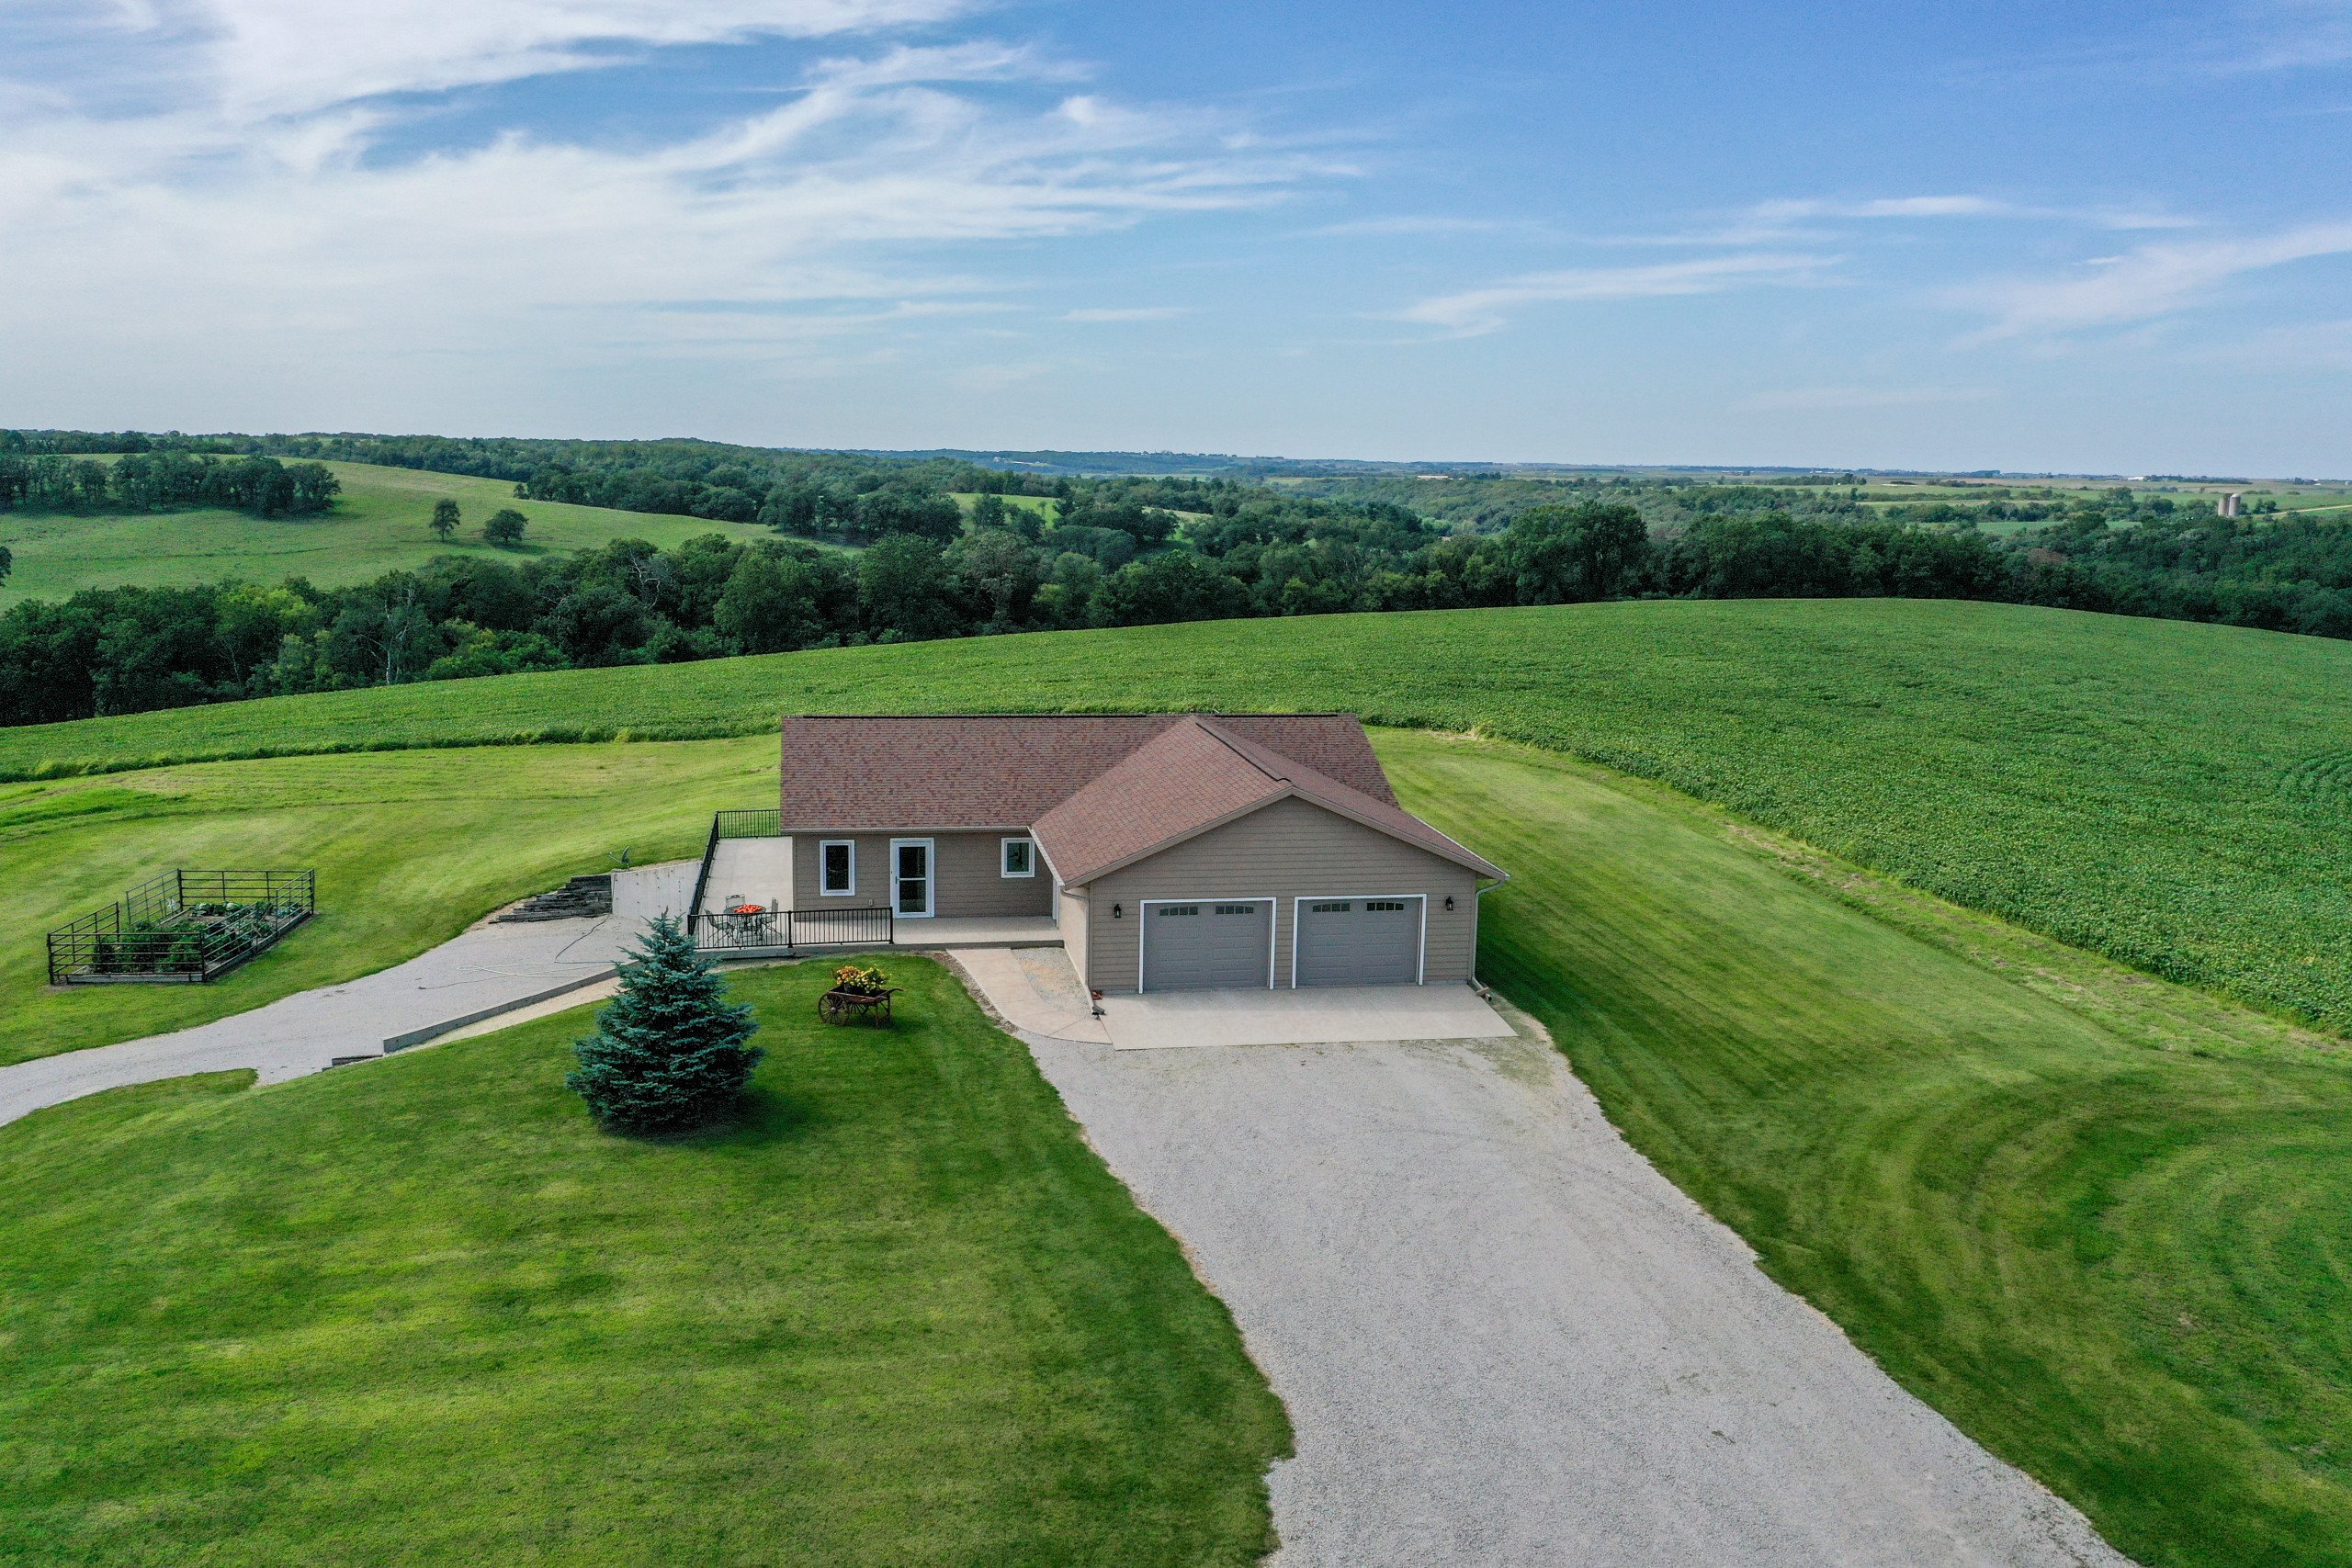 residential-land-grant-county-wisconsin-0-acres-listing-number-16393-DJI_0280-0.jpg